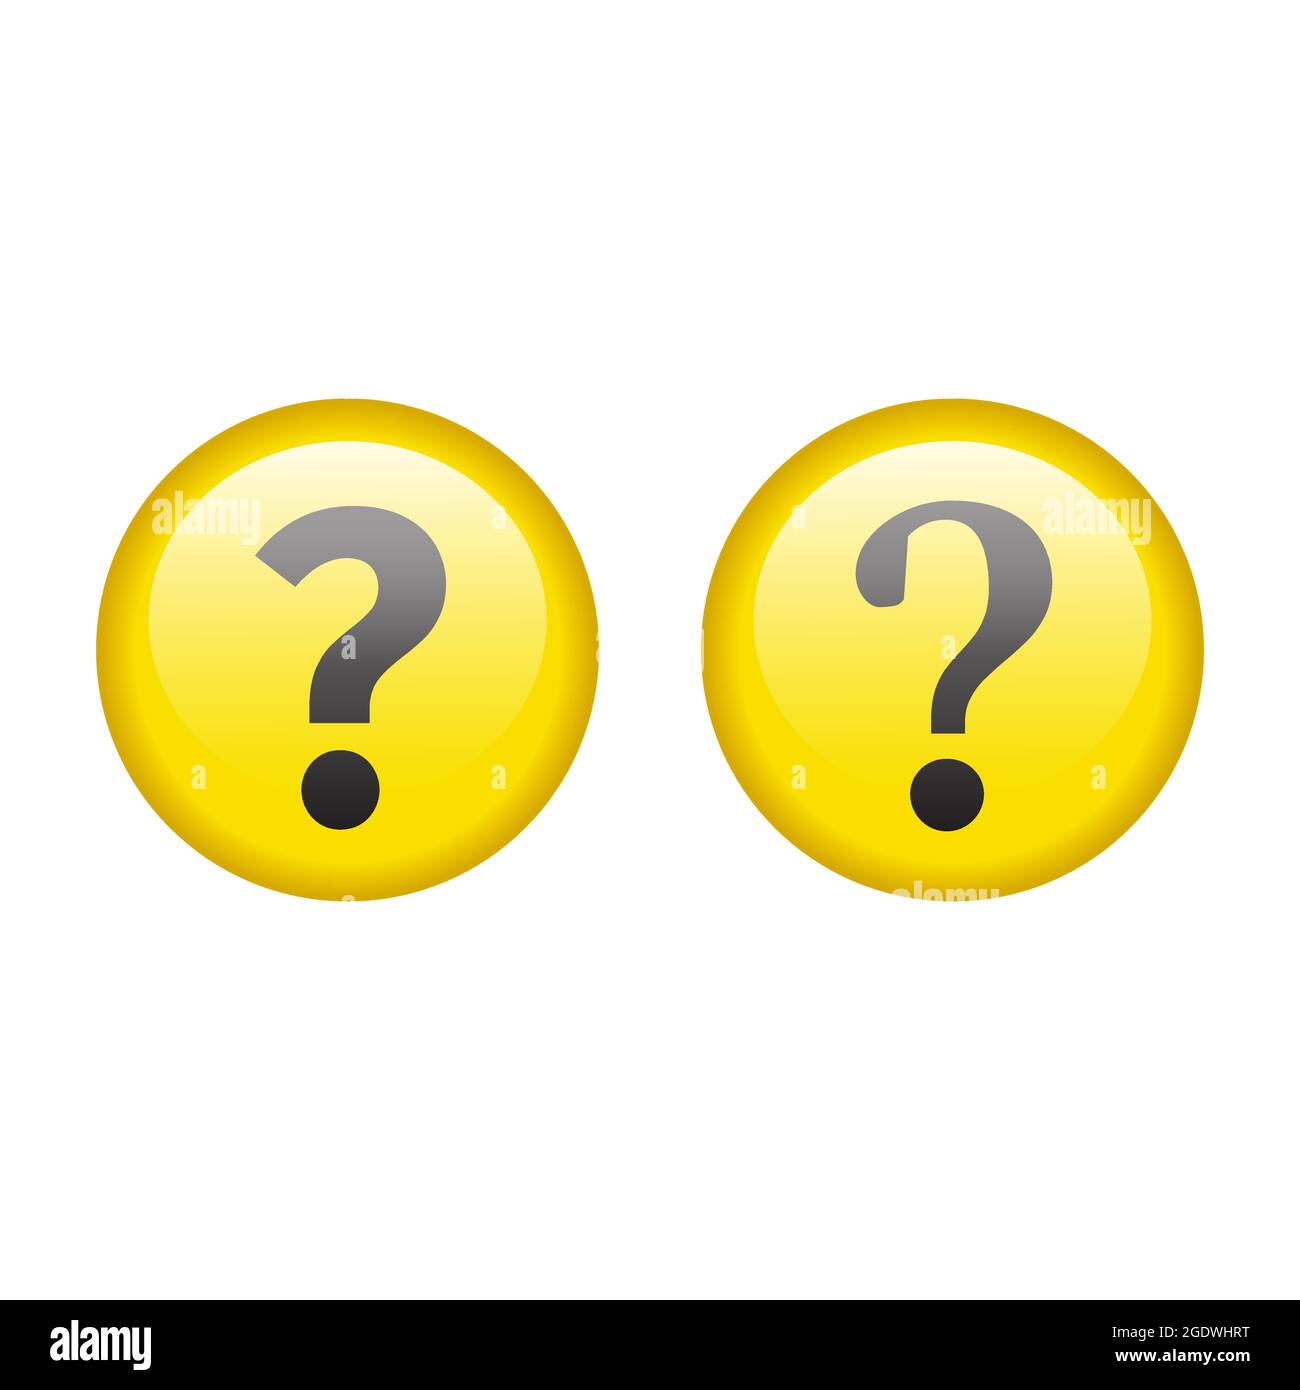 Question mark glossy yellow button. Help shiny circle icon. Stock Vector